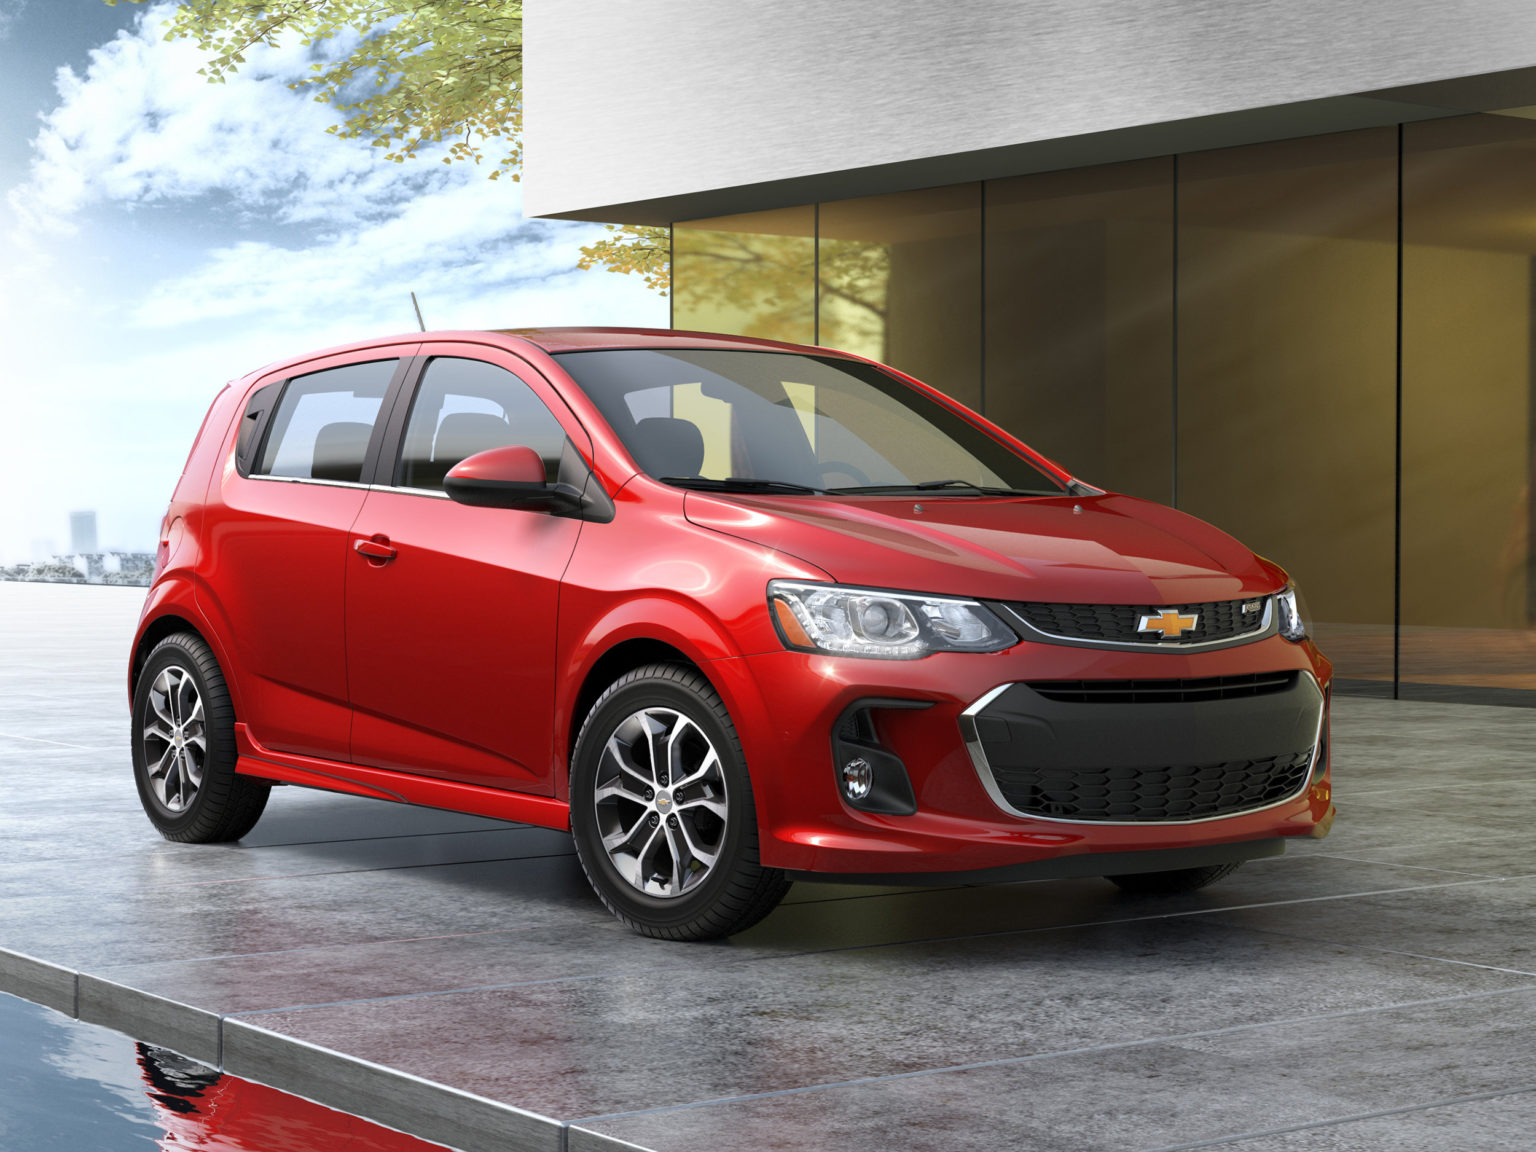 The Chevrolet Sonic is one of the smallest cars you can buy, but it's costly to insure.